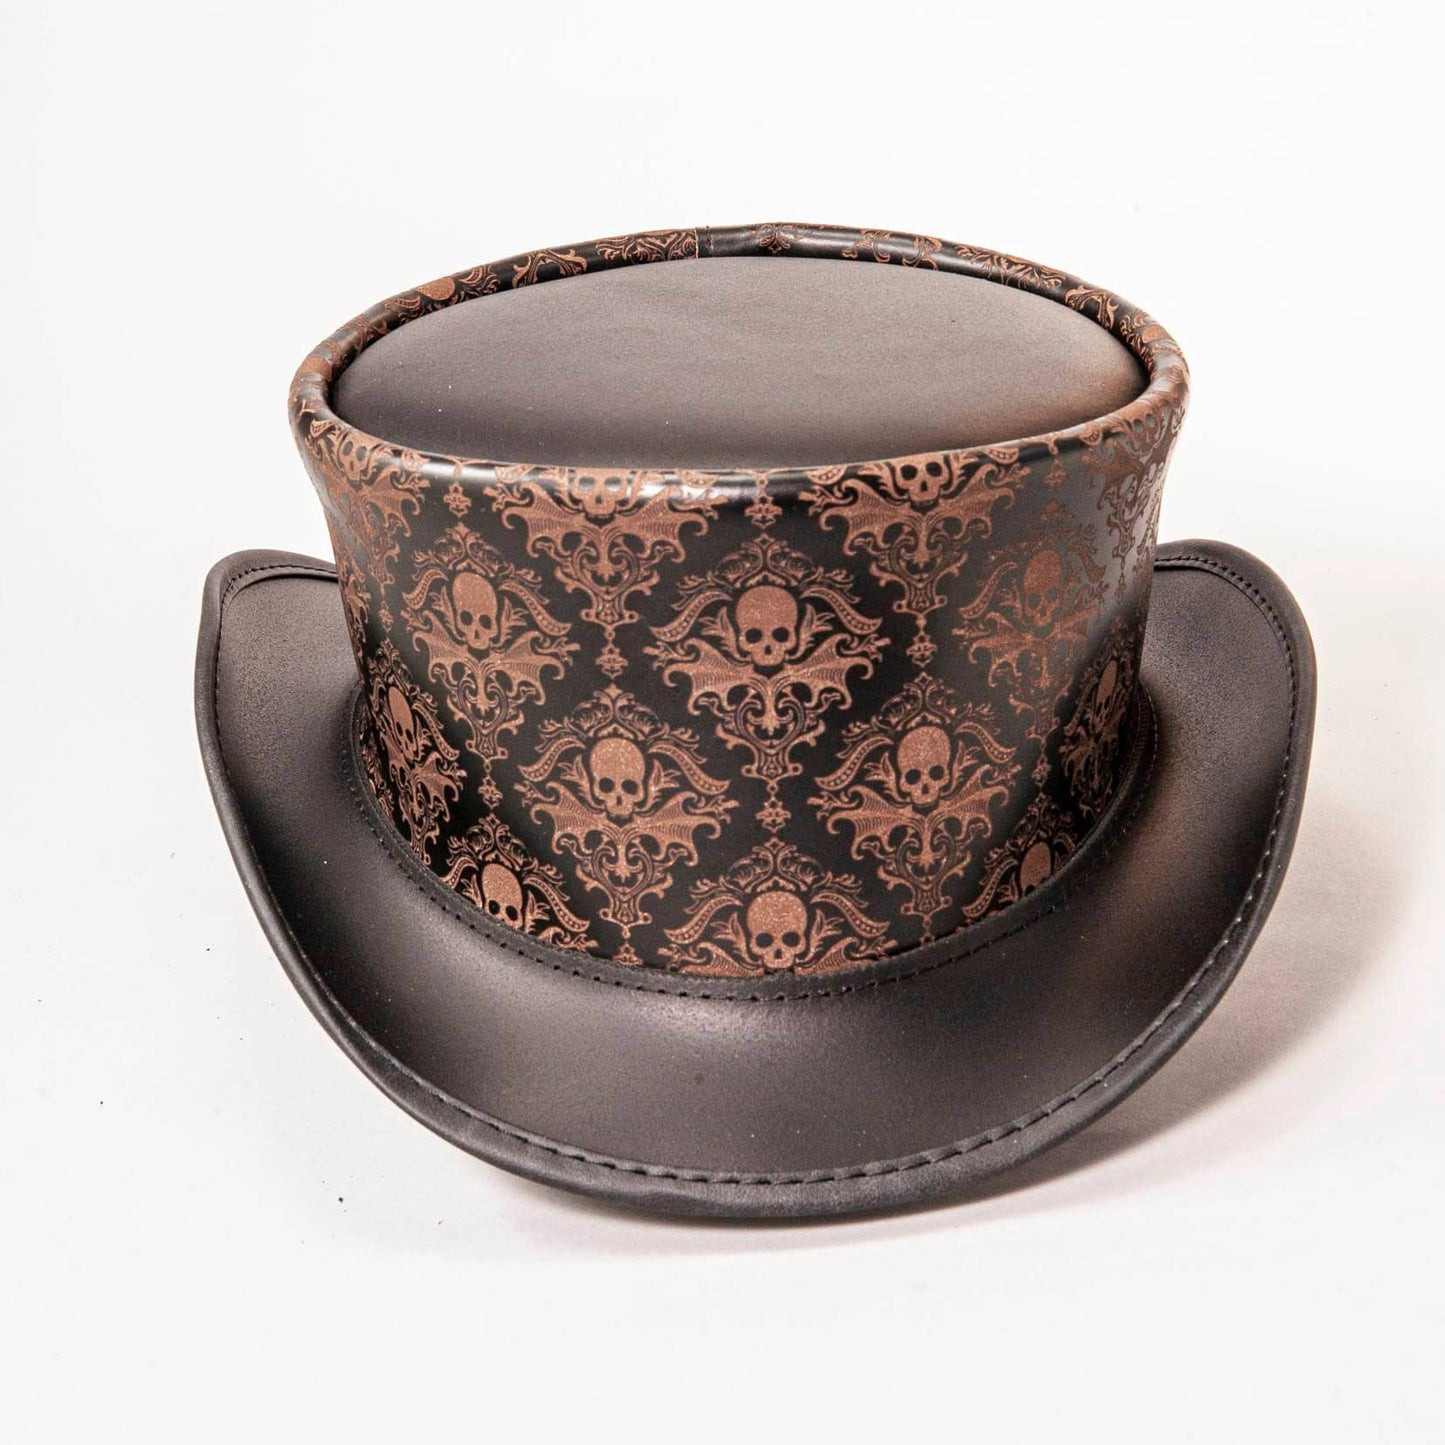 Royal Skull - Leather Top Hat - Leather Hat Band